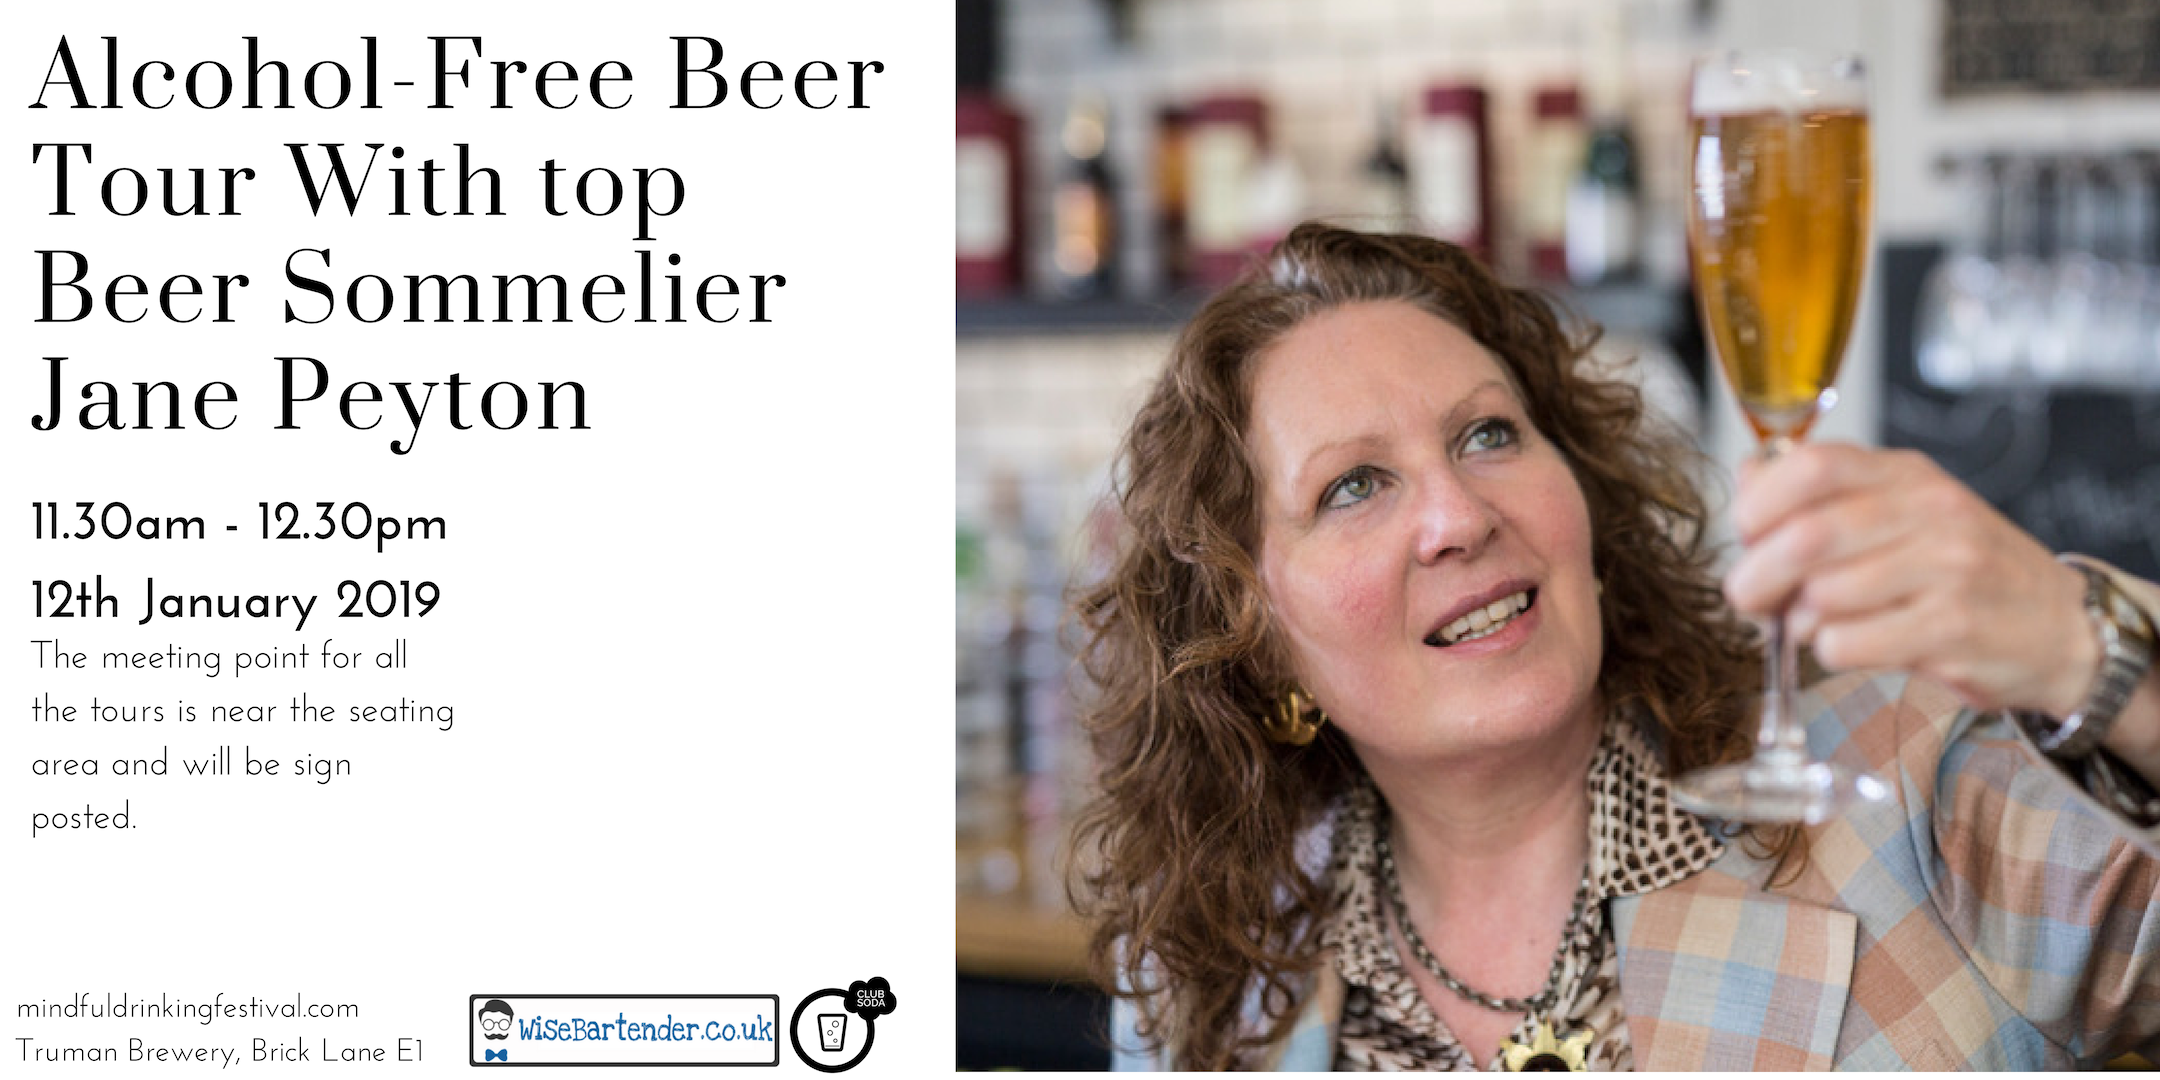 Alcohol-Free Beer Tour With top Beer Sommelier Jane Peyton 